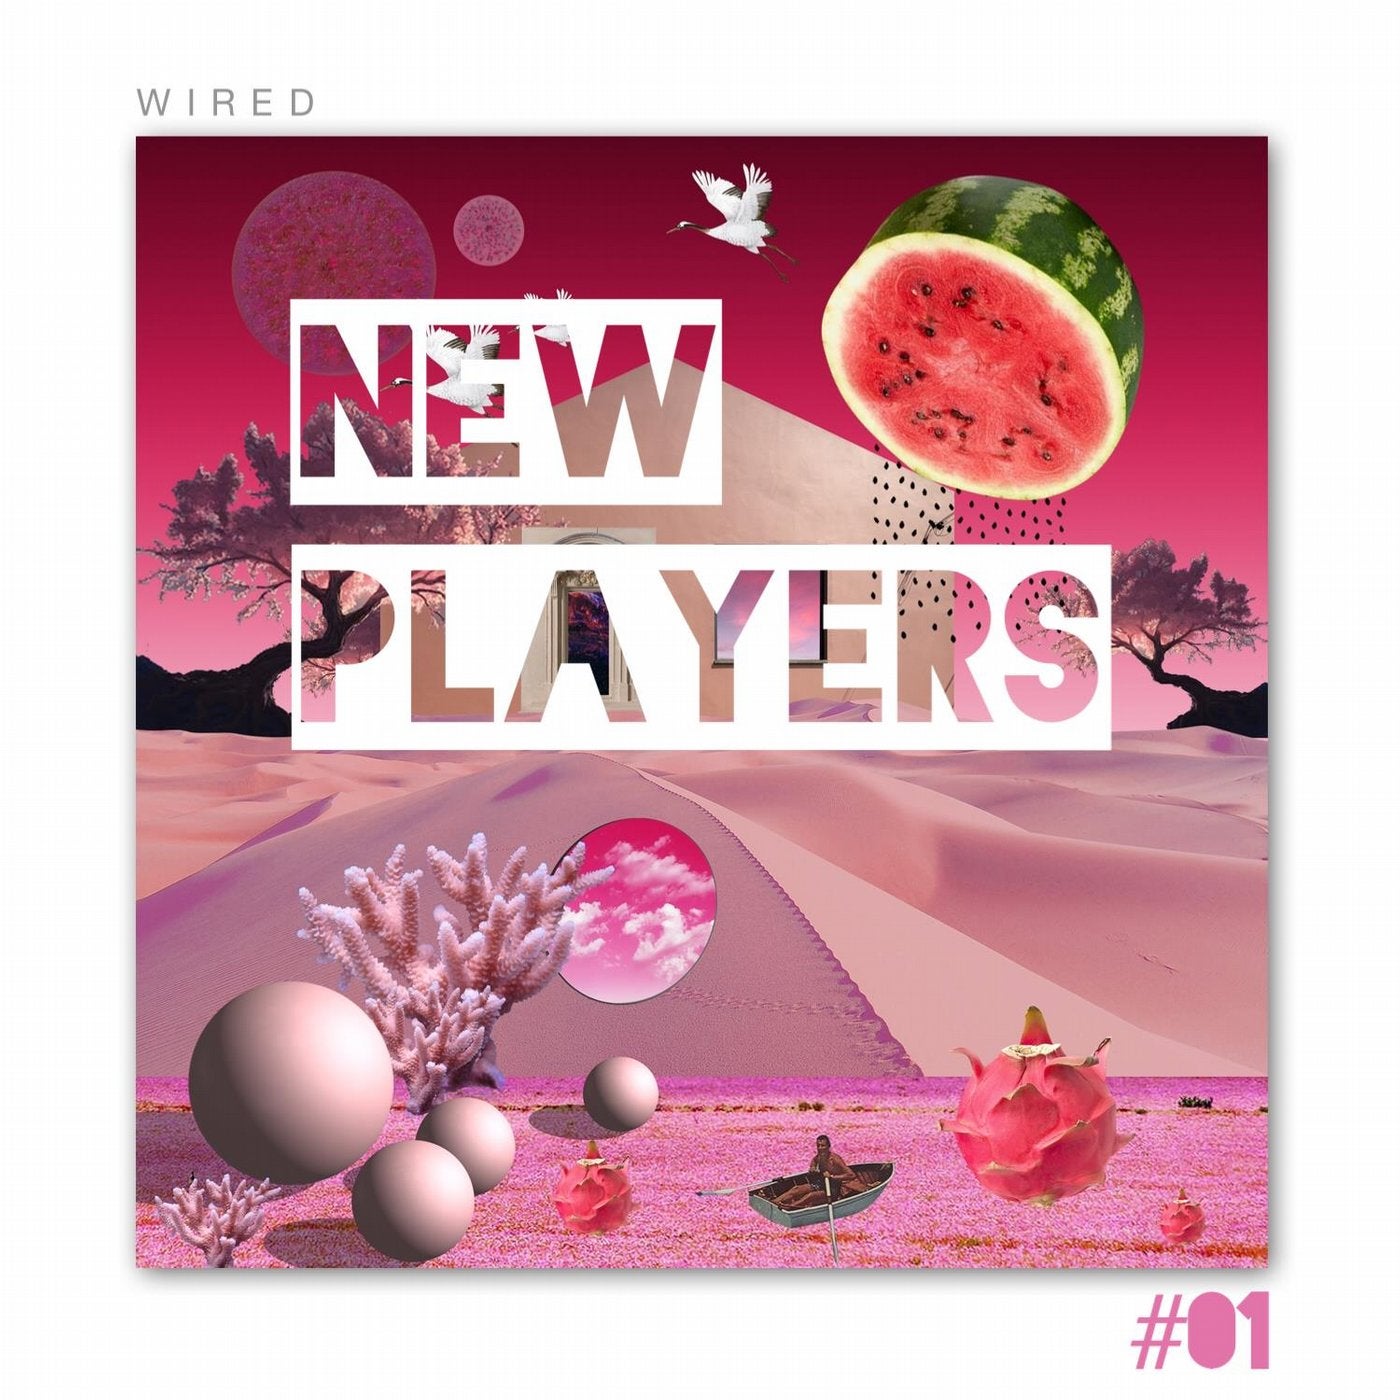 WIRED NEW PLAYERS #01